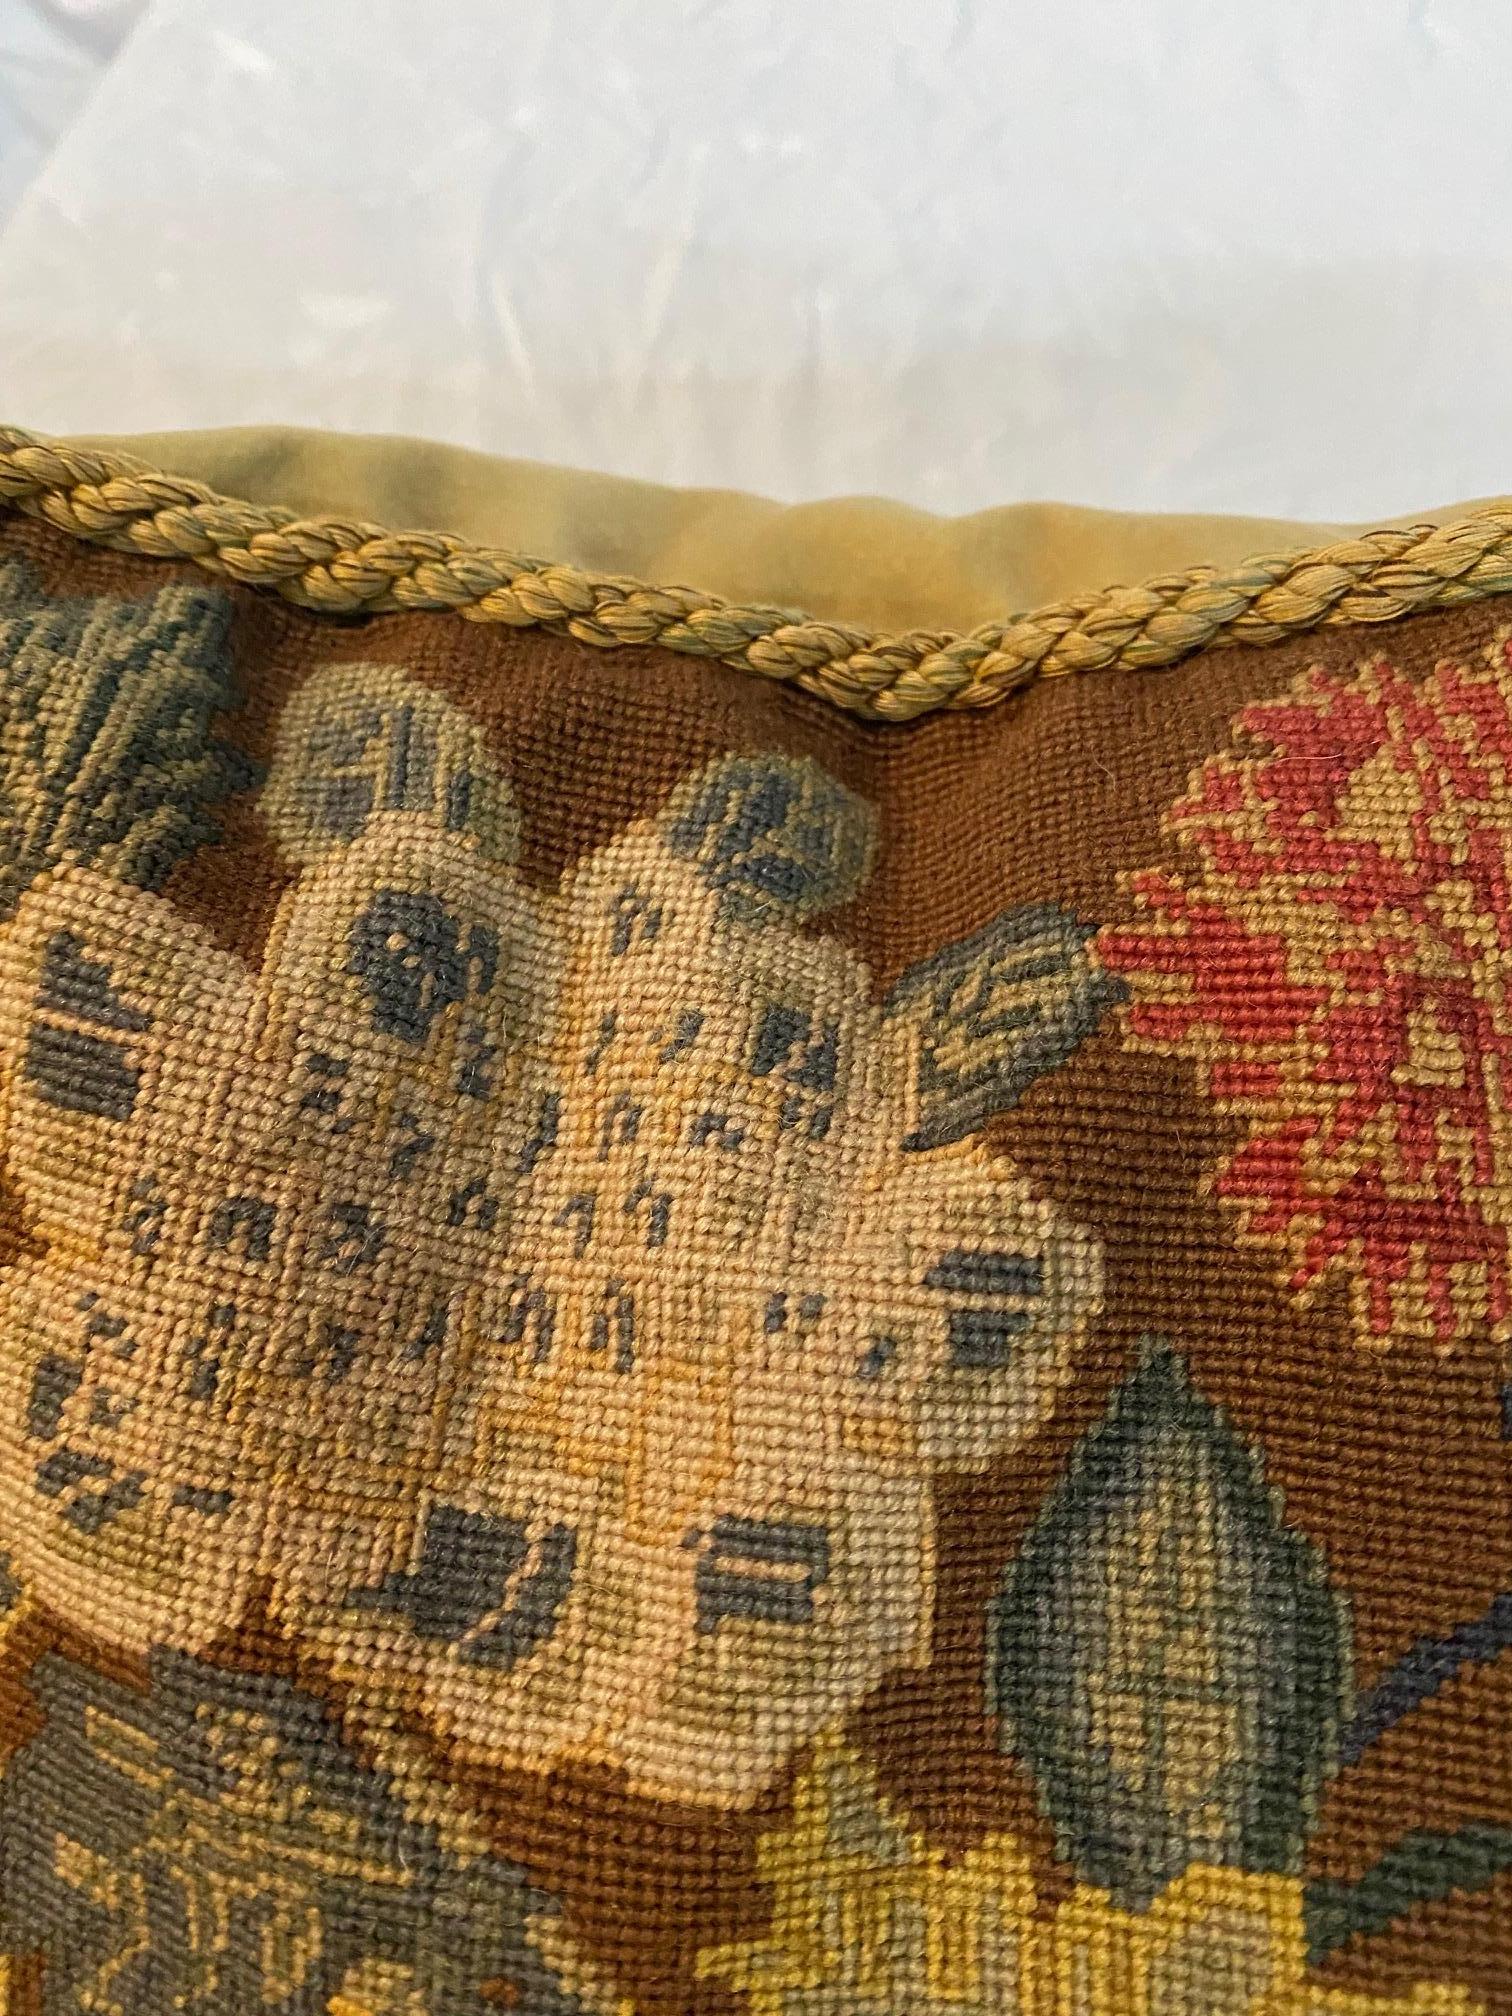 Pair of Antique Square Needlework Cushions In Good Condition For Sale In Palm Beach, FL